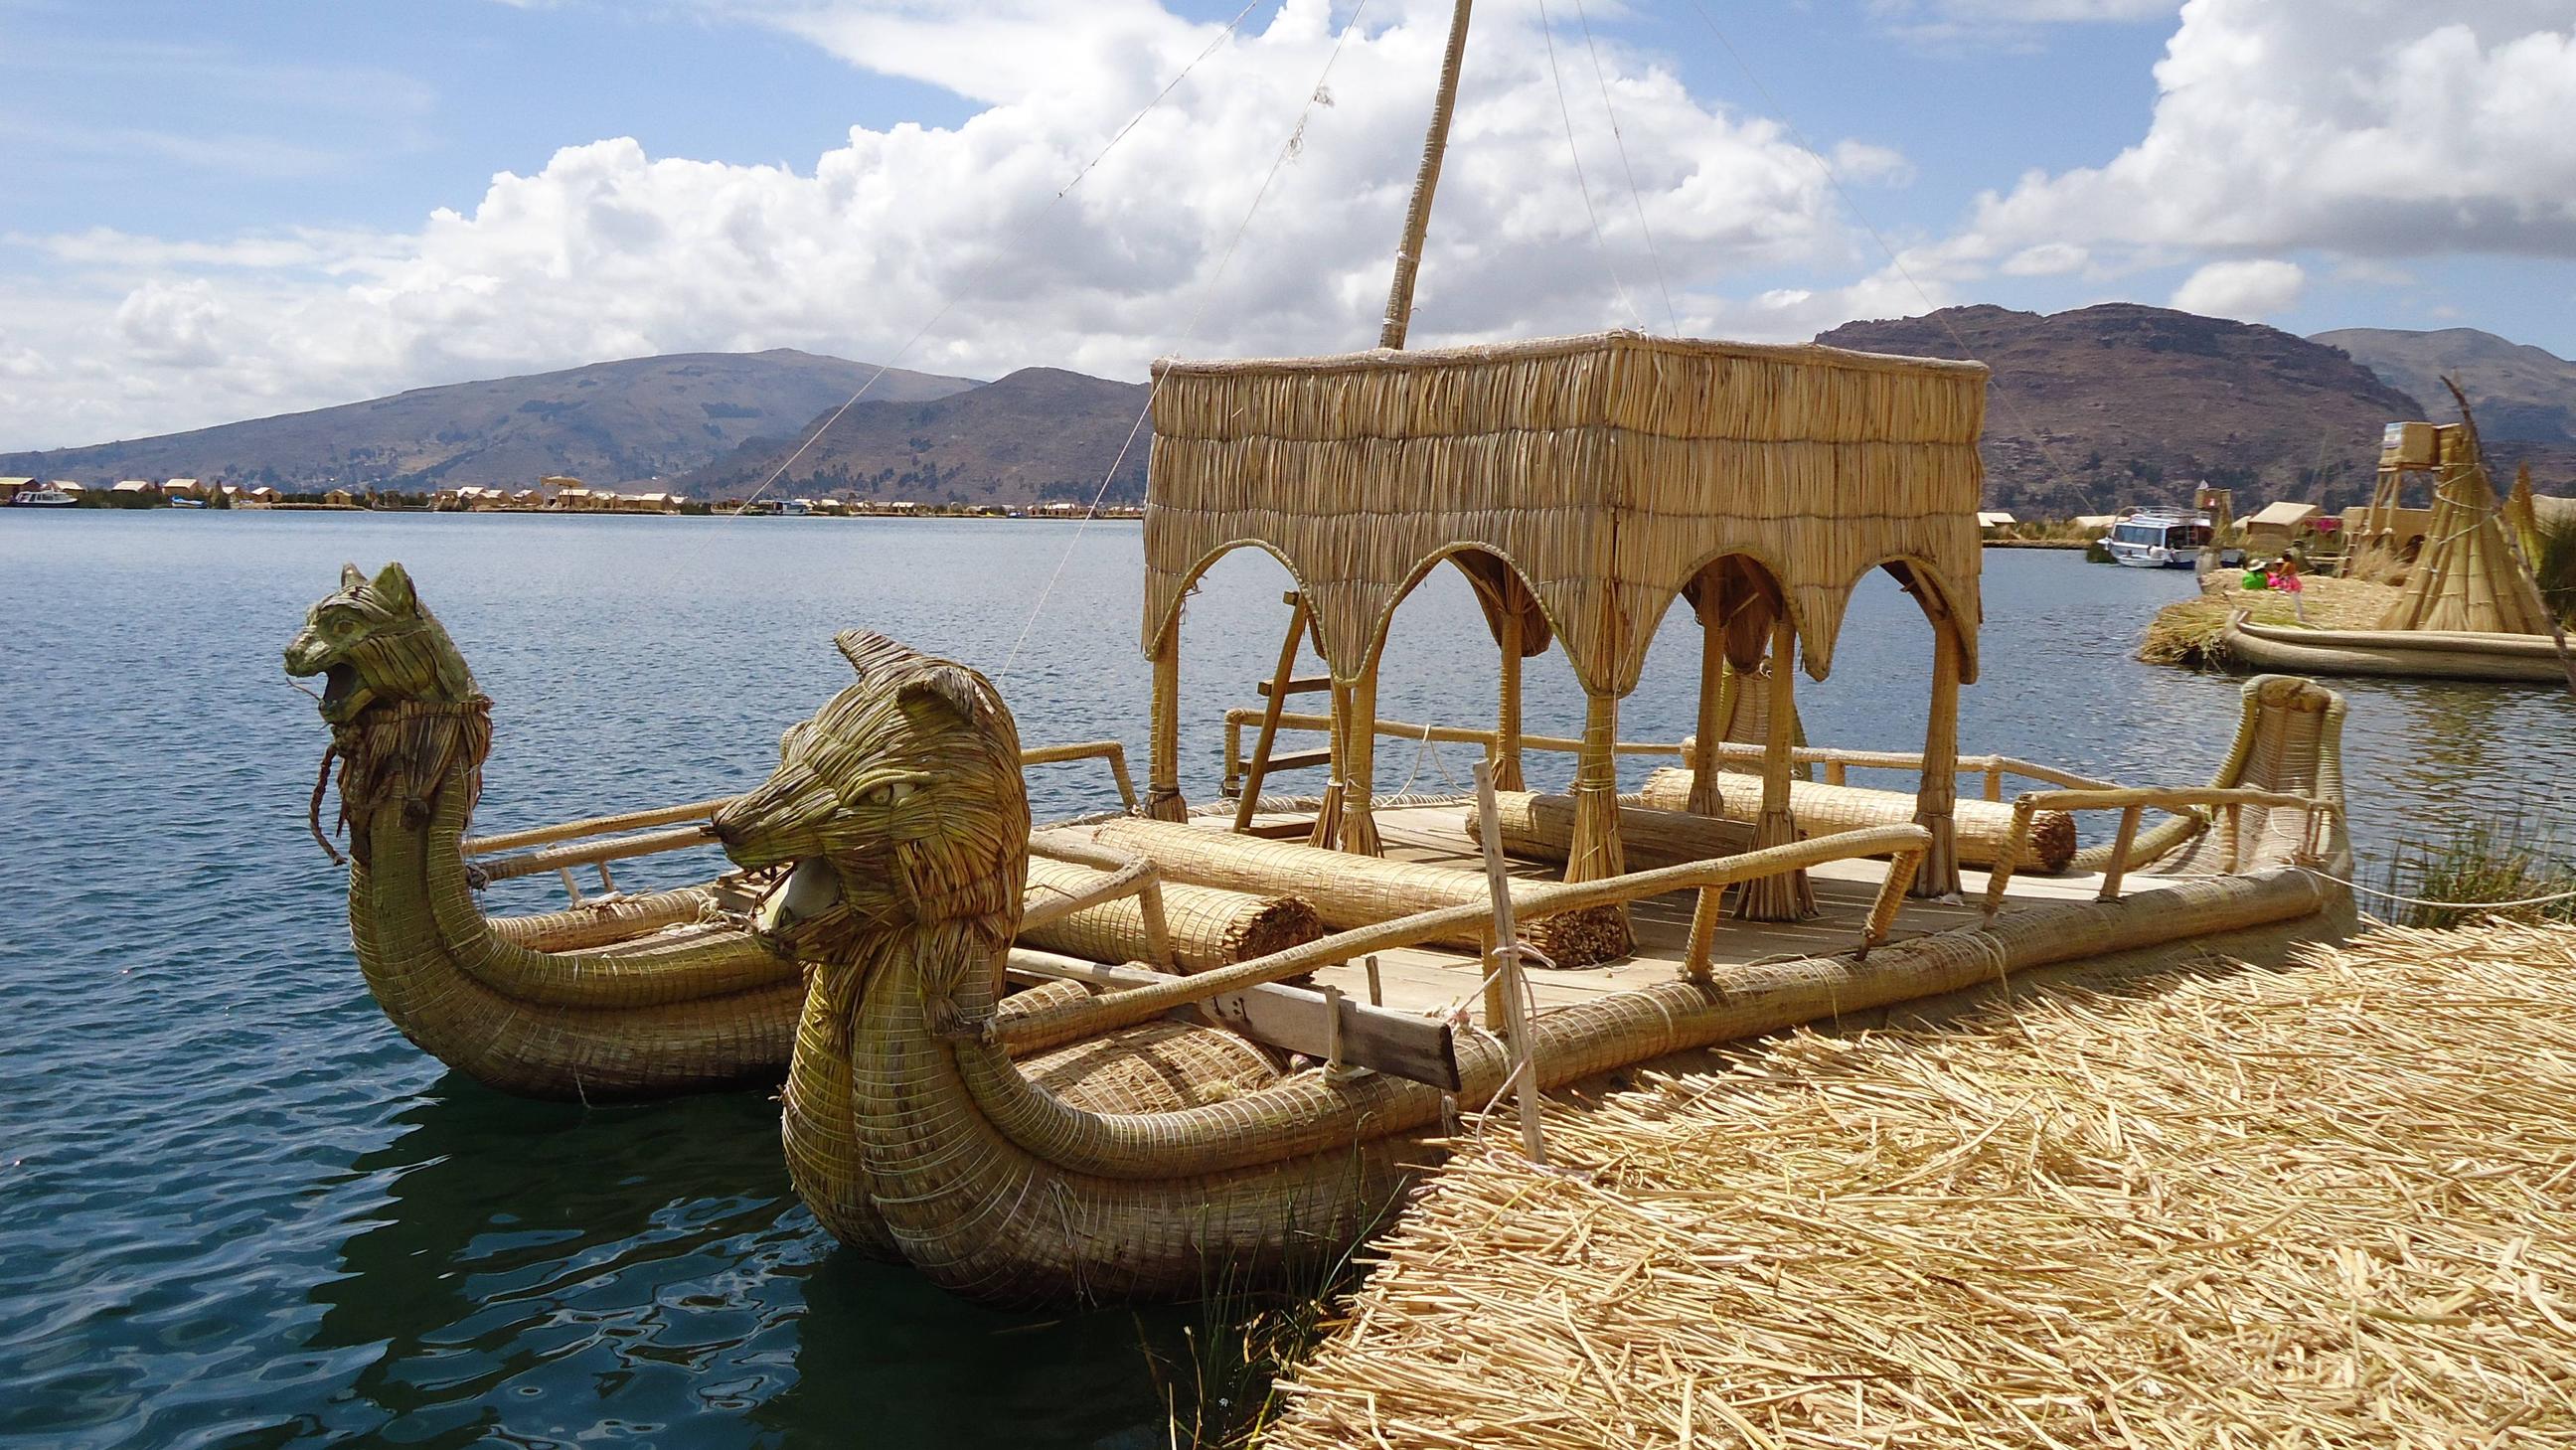 Boat made entirely from reeds - Lake Titicaca - Imgur